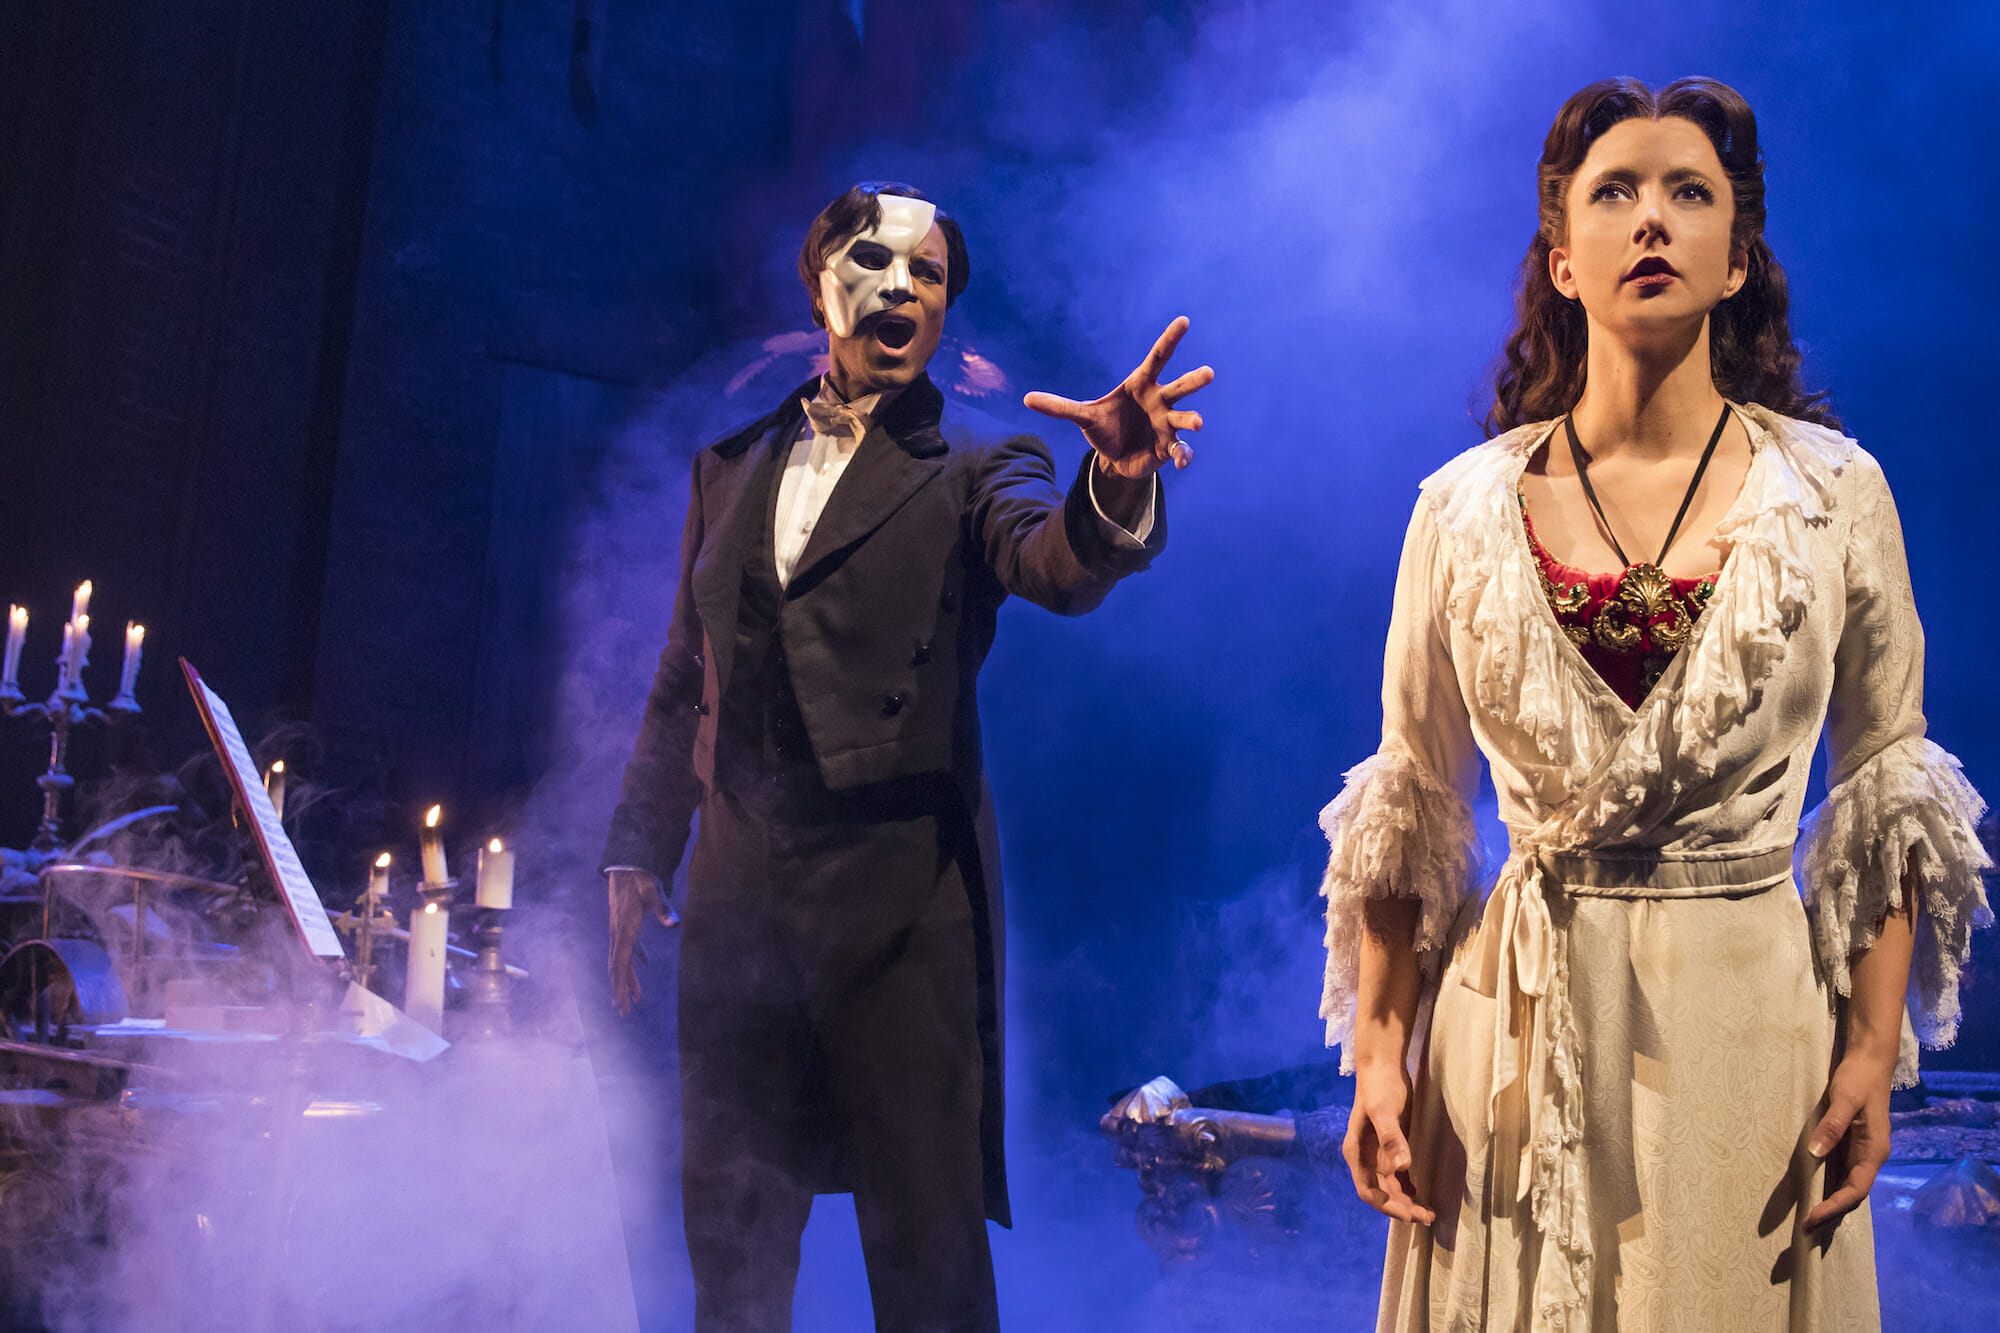 Broadway in Chicago presents THE PHANTOM OF THE OPERA